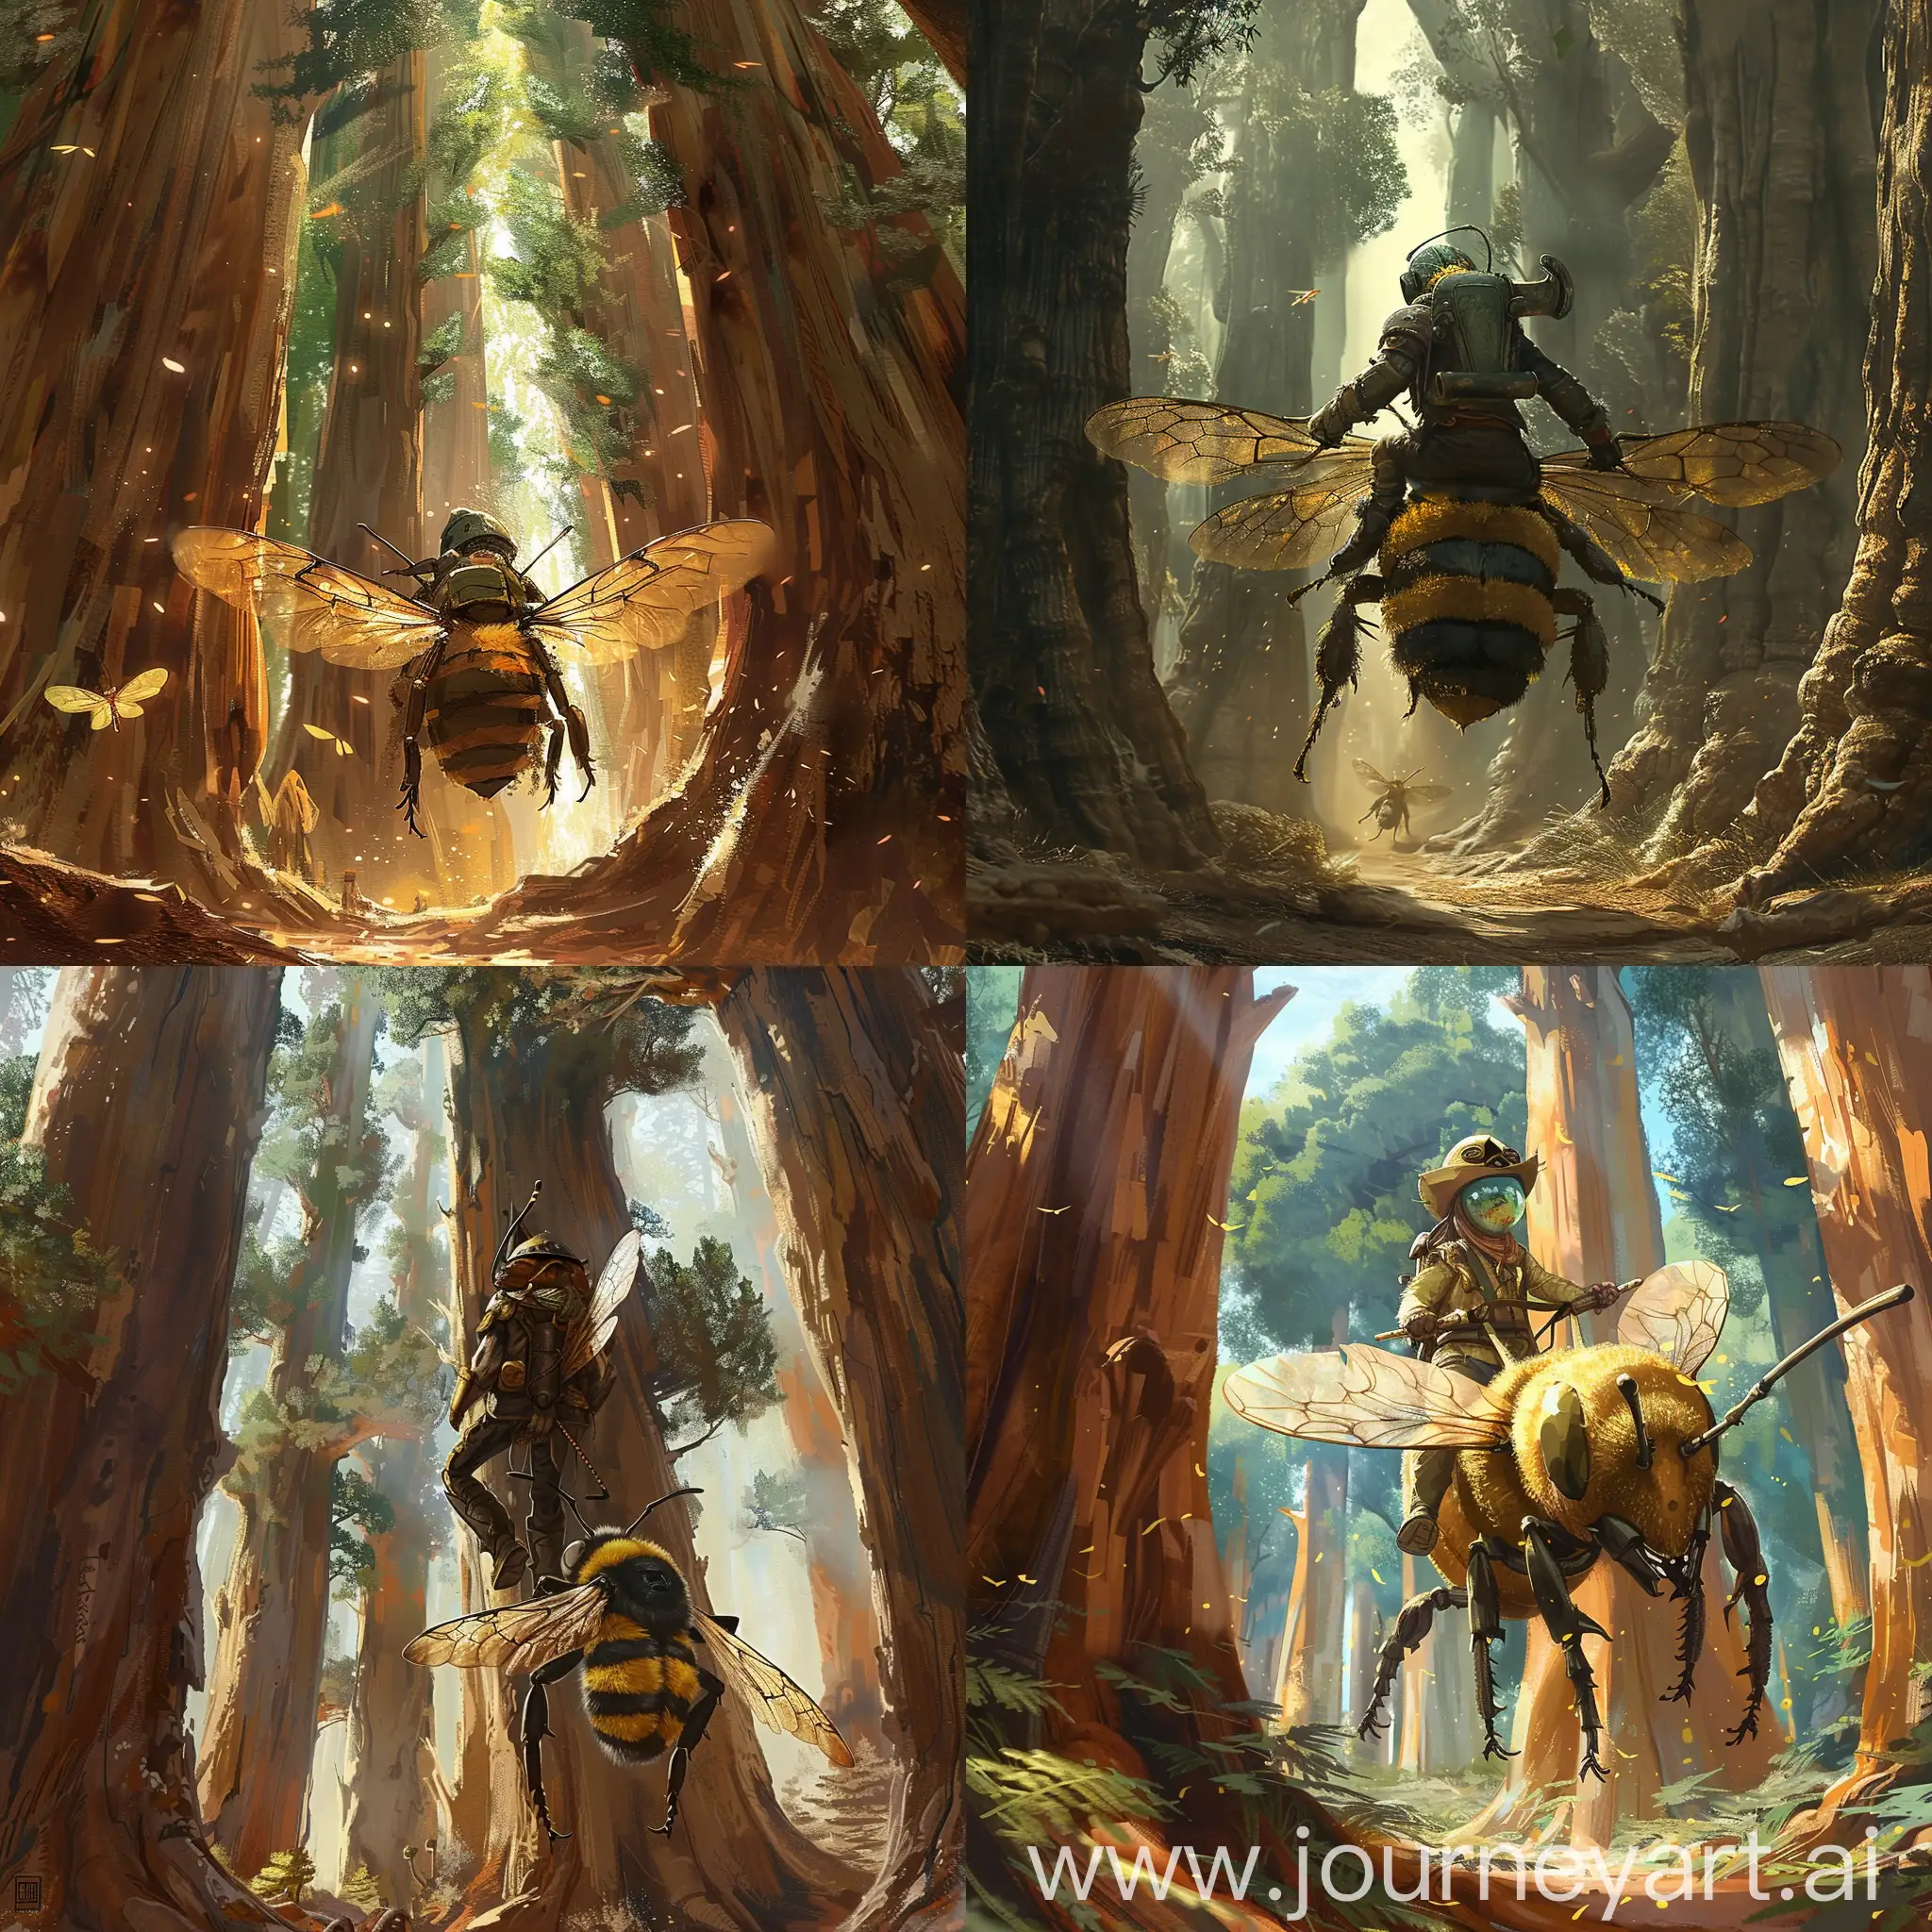 A fantasy explorer riding a giant bee through a forest of massive trees.